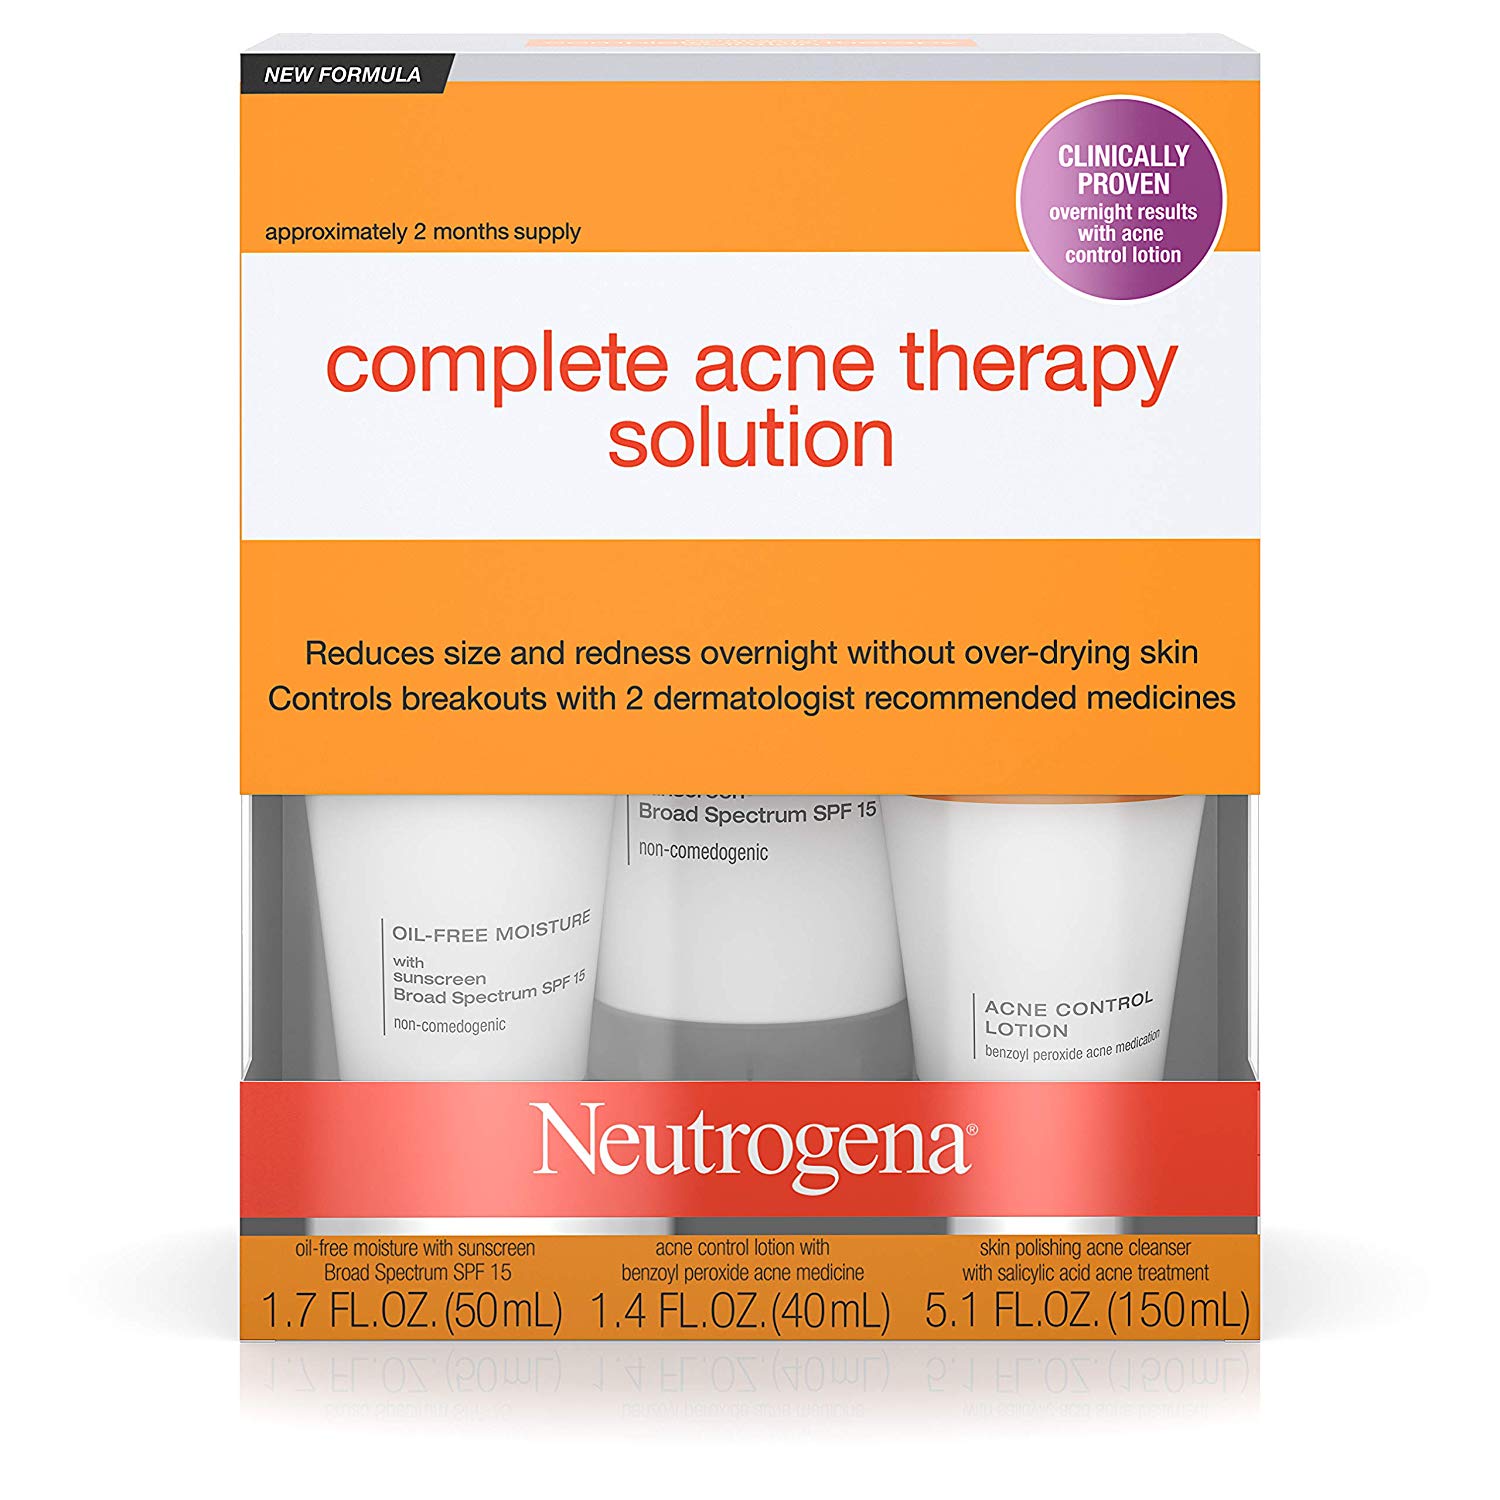 Top 5 Best Acne Treatment Products on Amazon 2019 | Latin Post - Latin